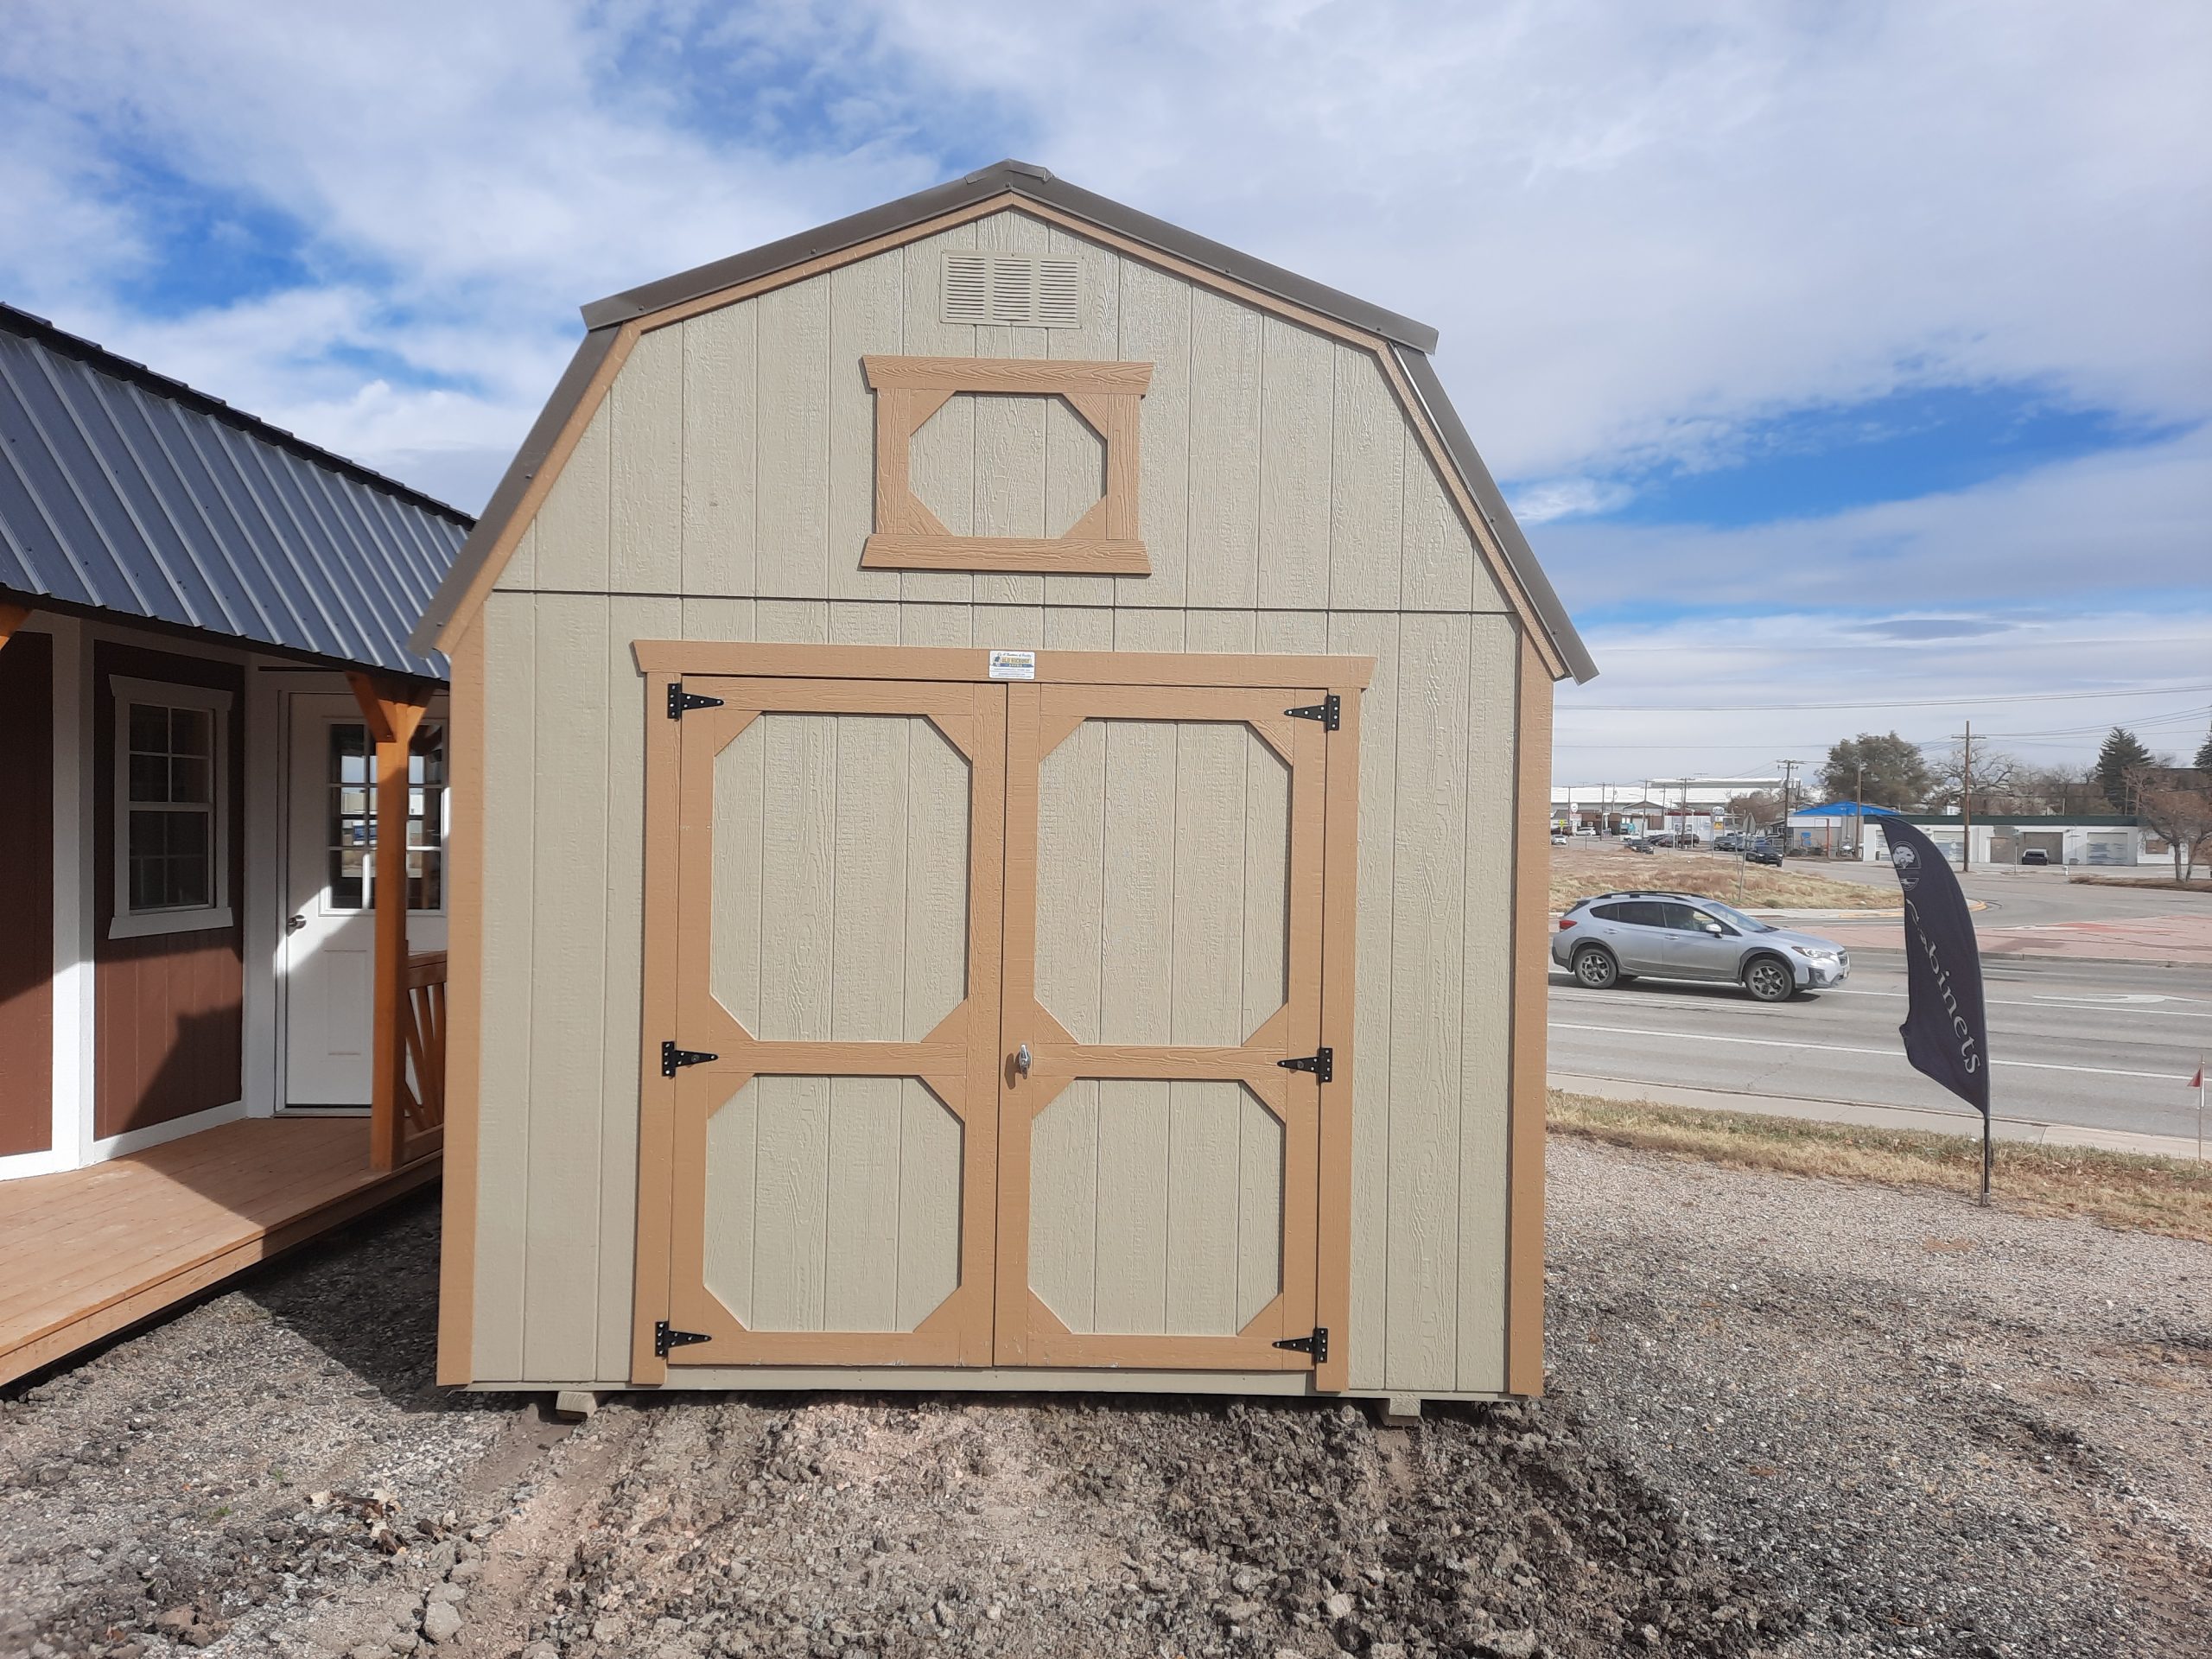 10×12 Lofted Barn Shed For Sale Baked Clay Paint